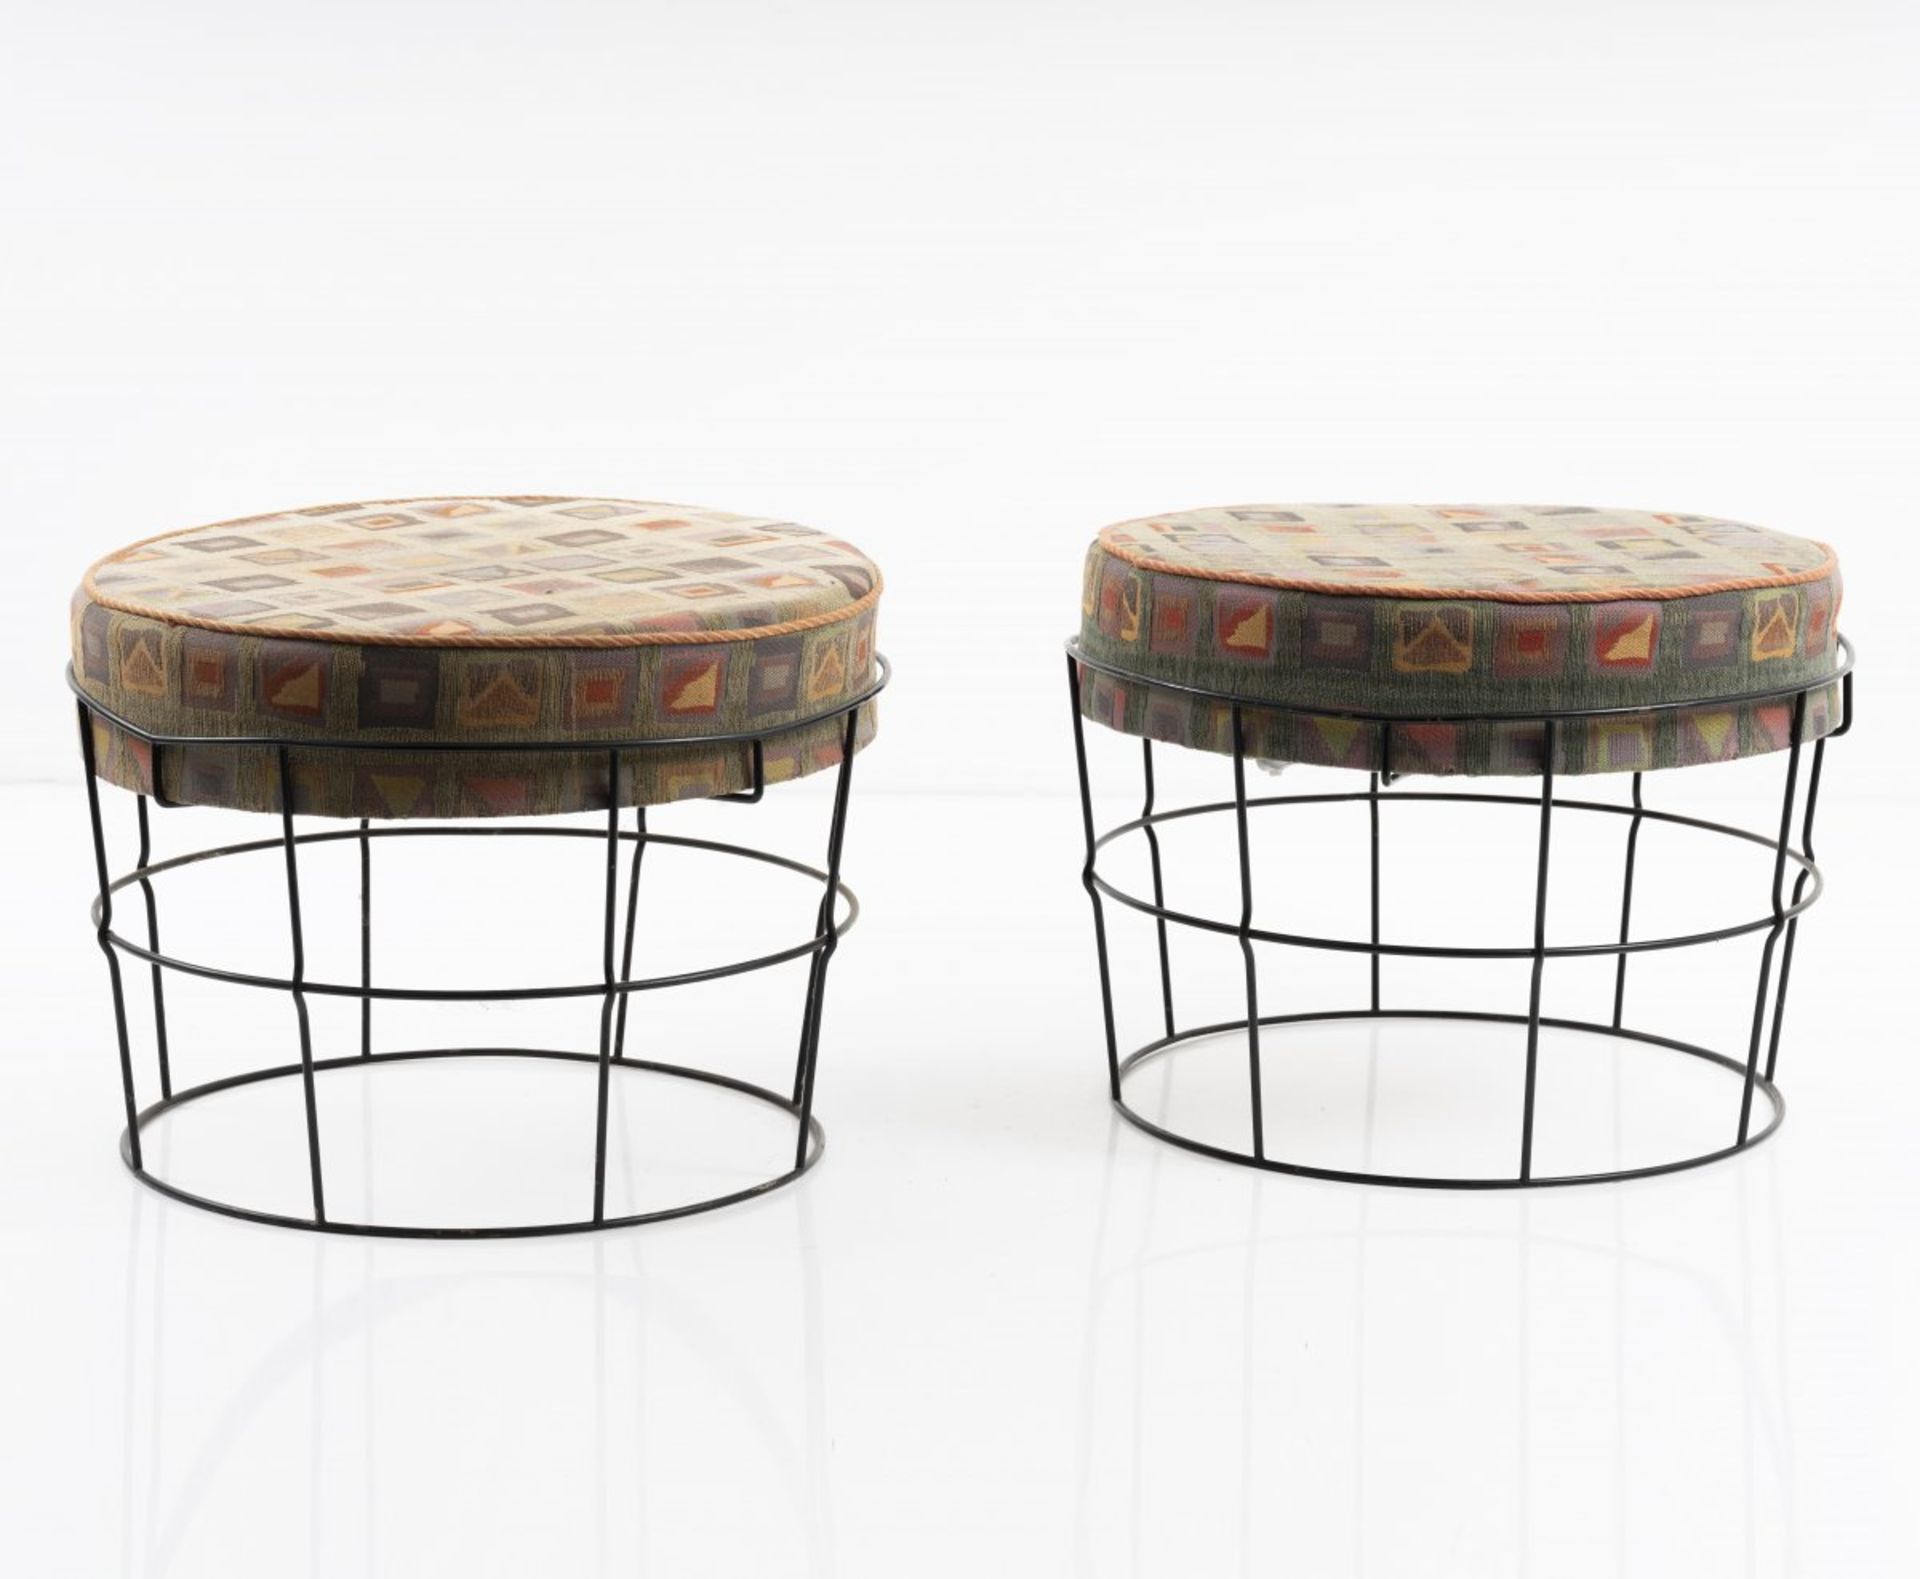 Verner Panton (in the style of), Set of two stools, 1960s